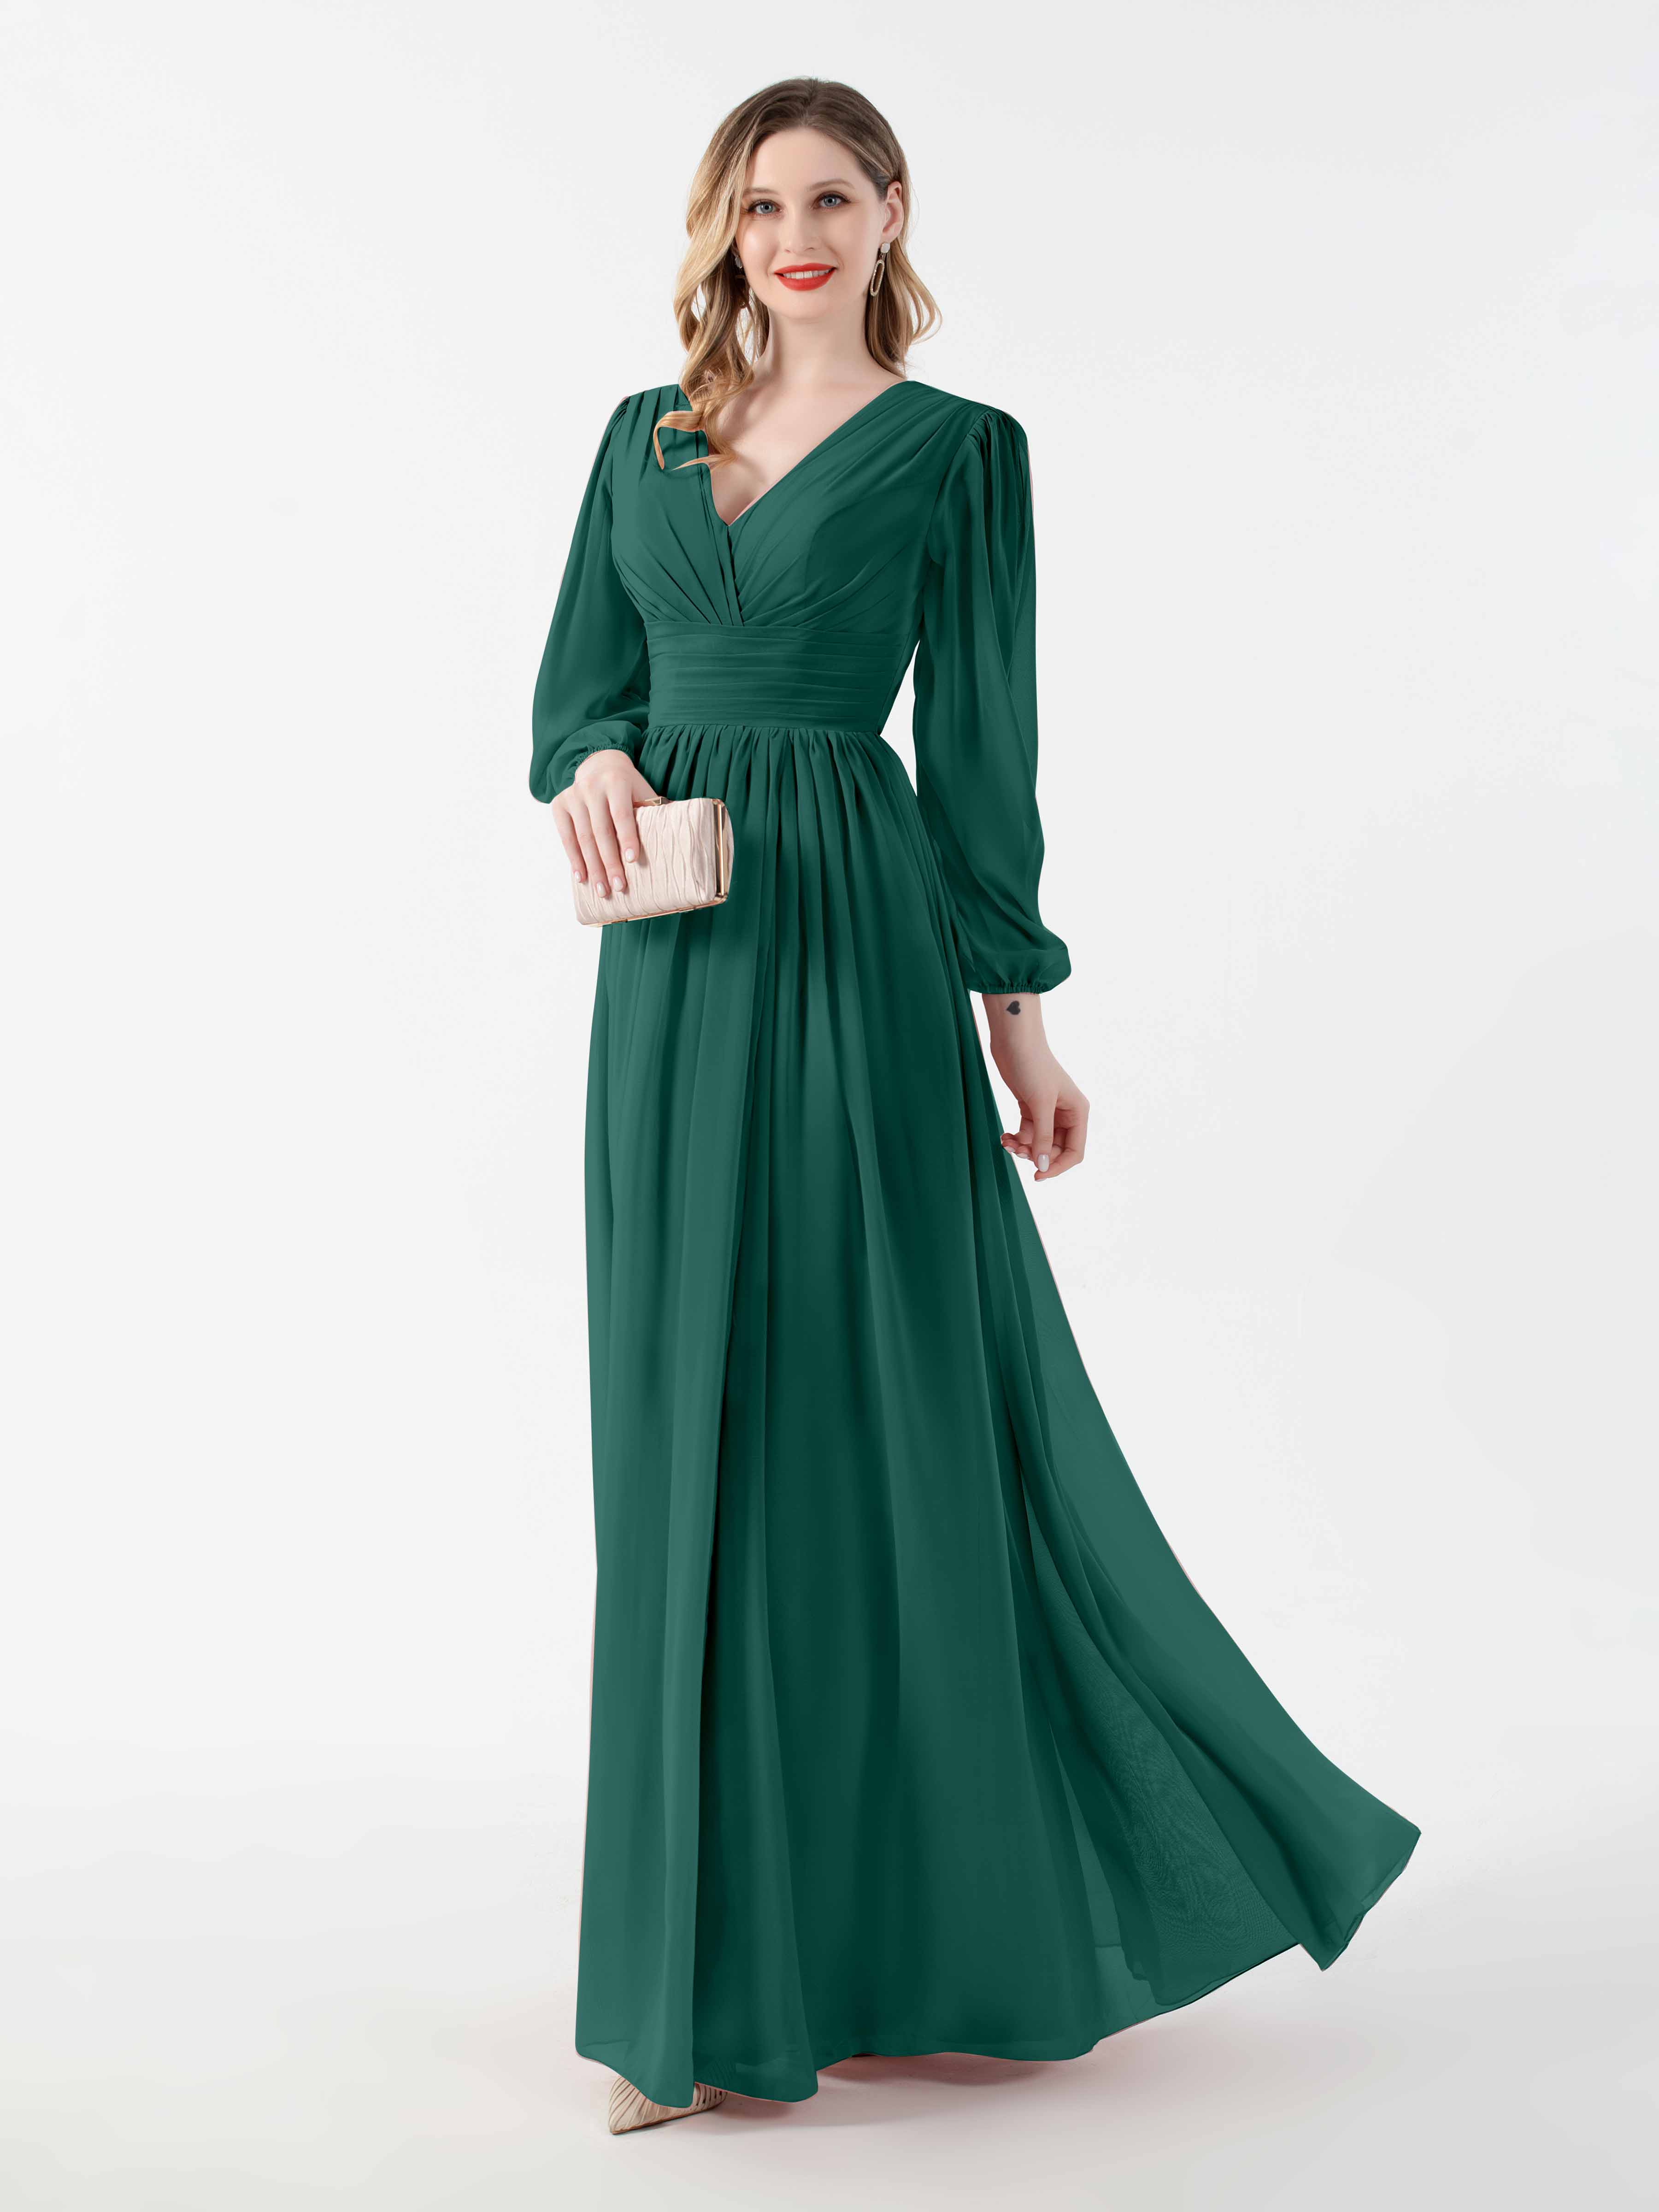 Taylor Airy Long Sleeves Chiffon Mother Of The Bride Dresses